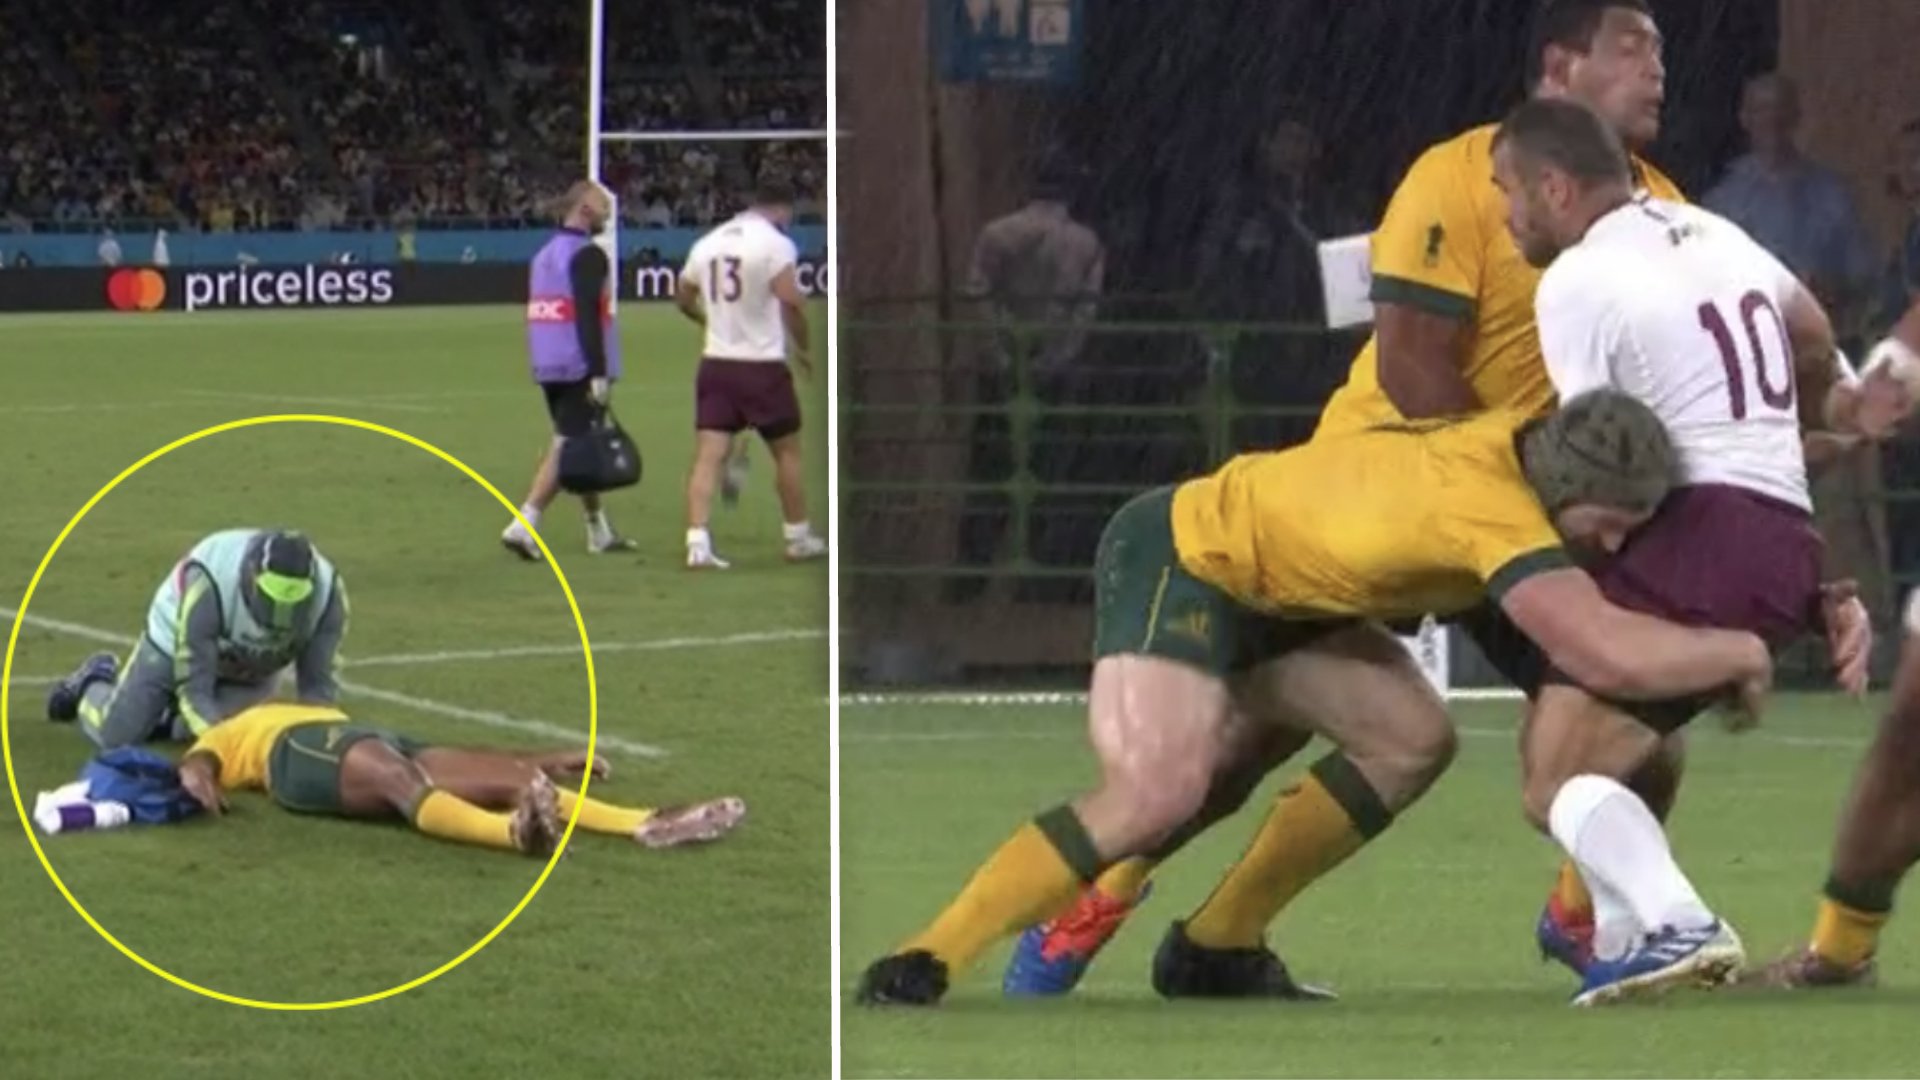 The collisions are brutal in the Australia vs Georgia World Cup match